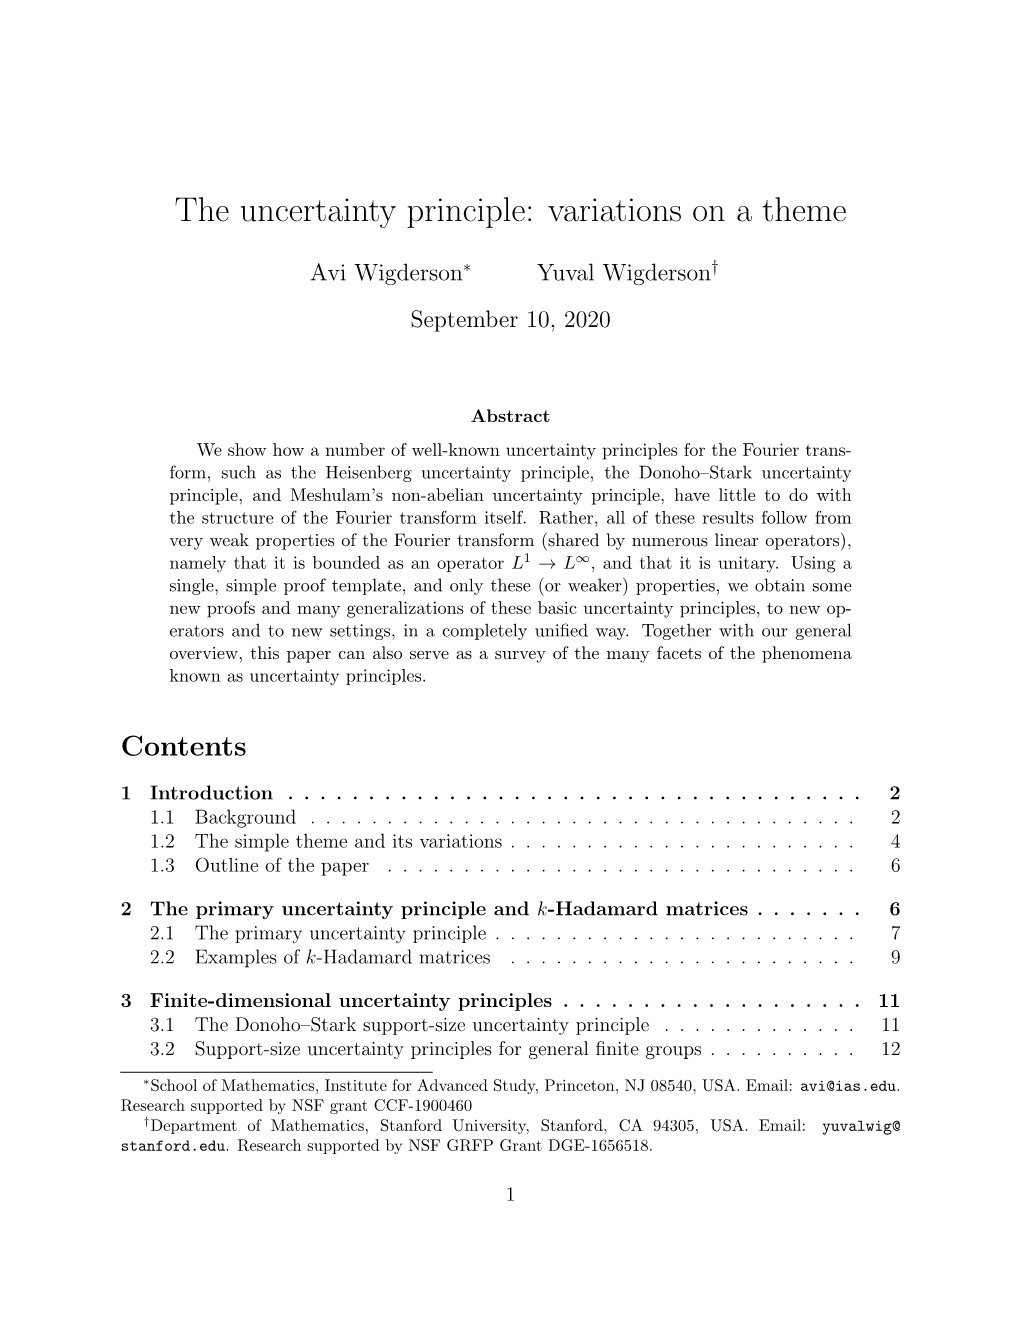 The Uncertainty Principle: Variations on a Theme